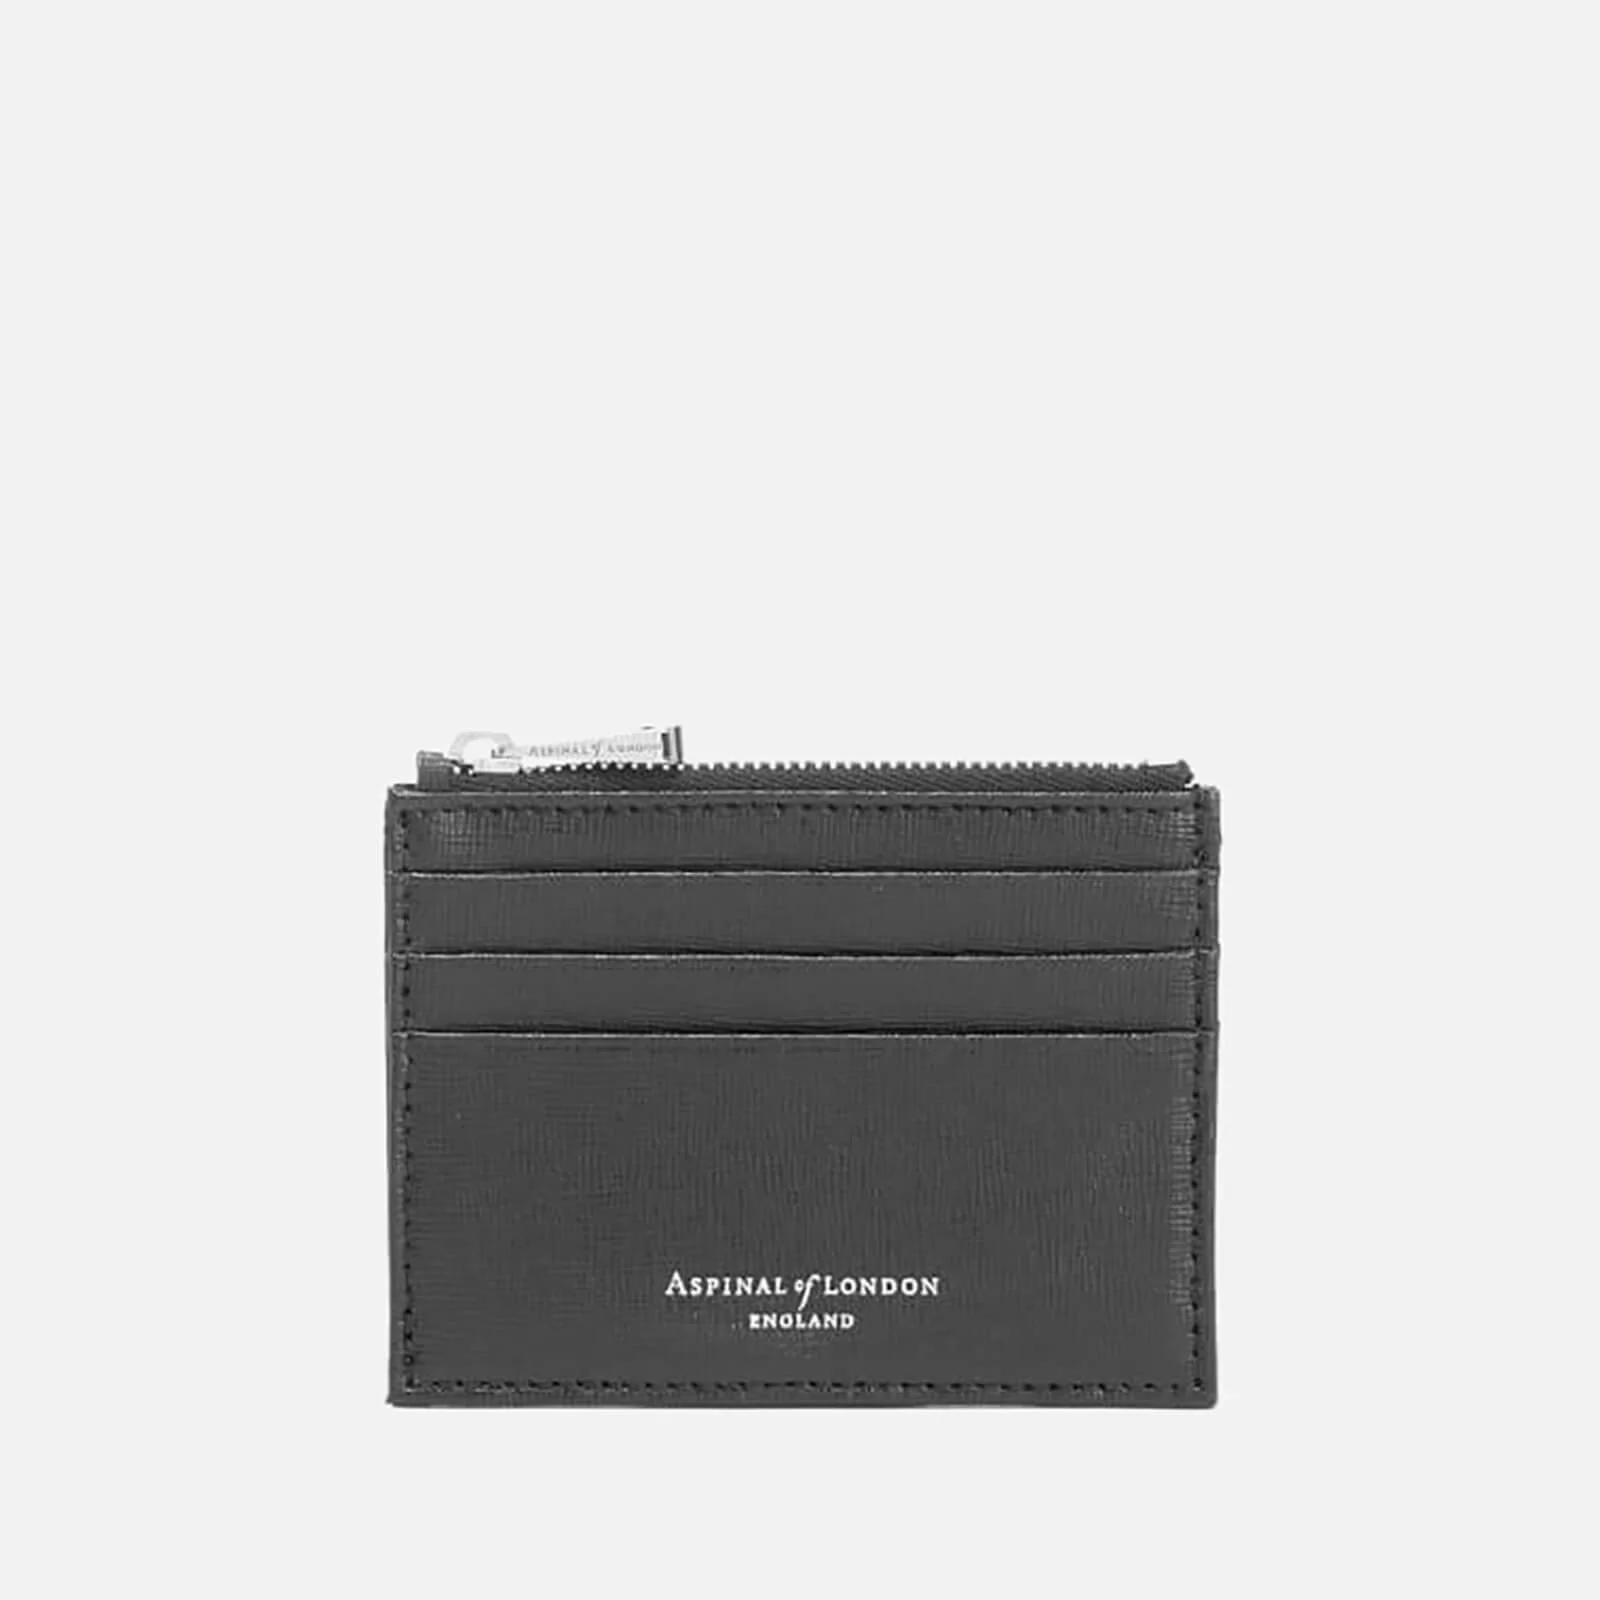 Aspinal of London Coin and Credit Card Case - Black Image 1